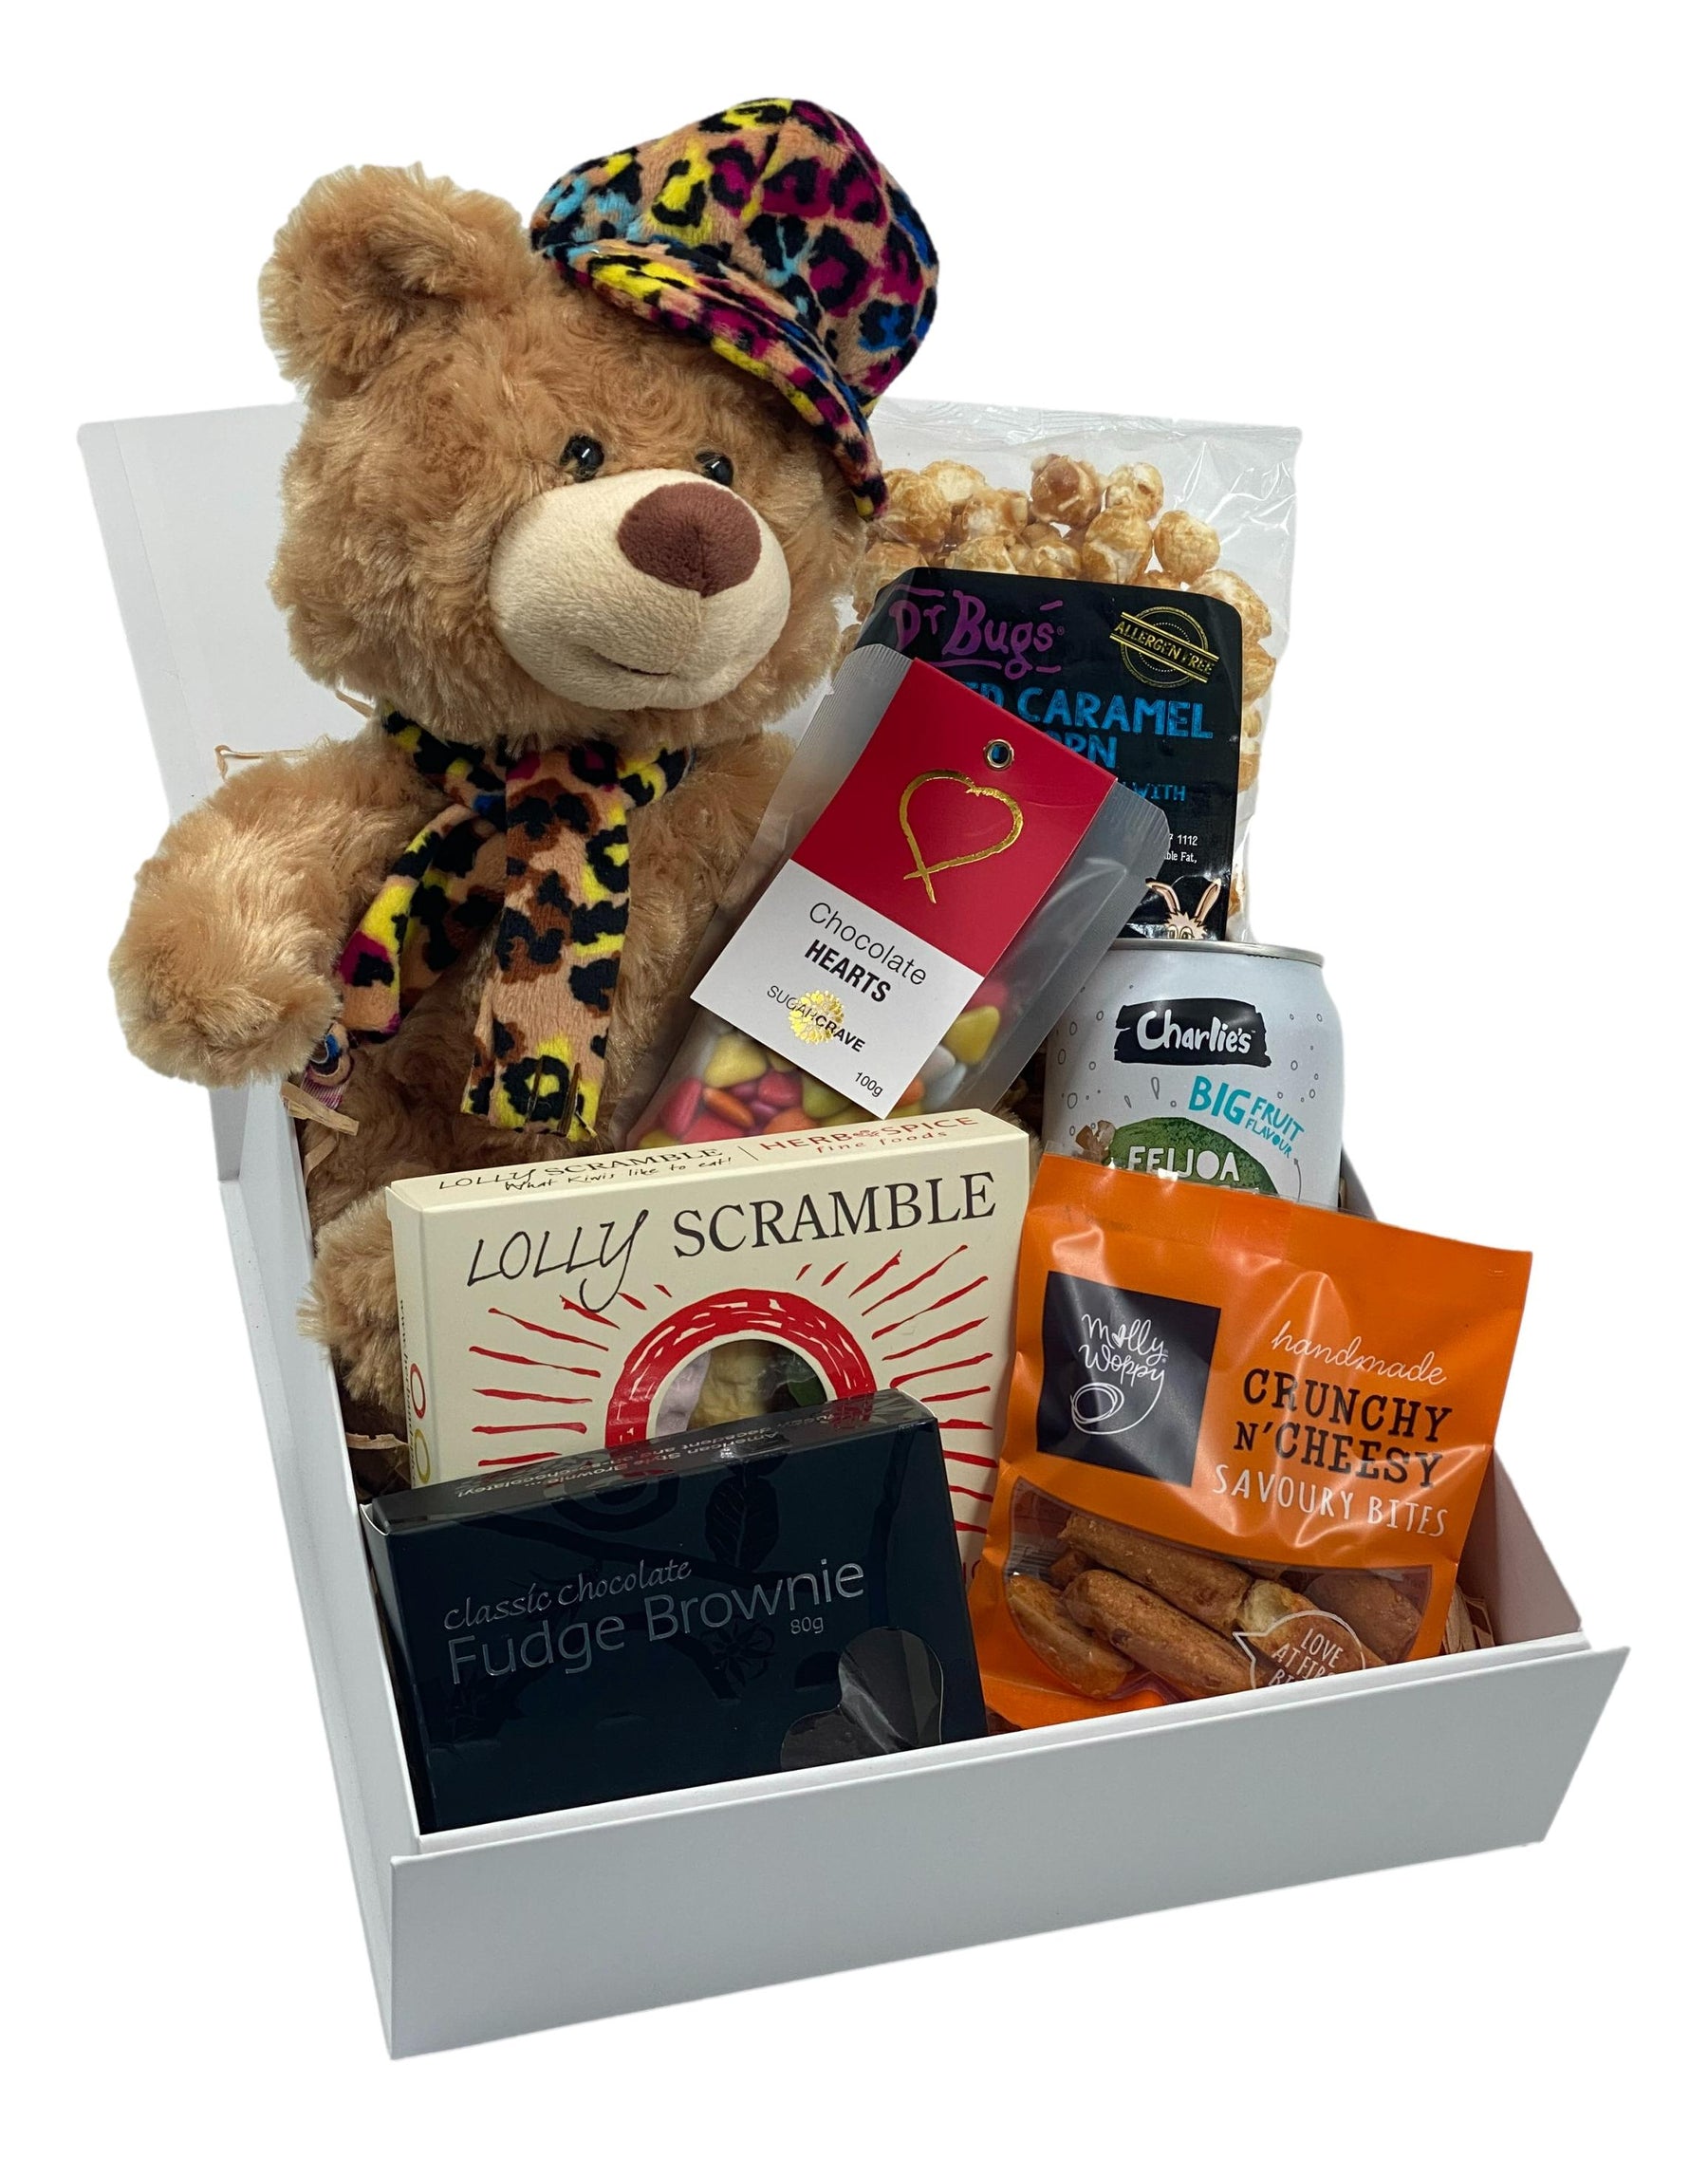 Gift Boxes for Children Birthday's, Hospital Gifts or Get Well Gifts - Basket Creations